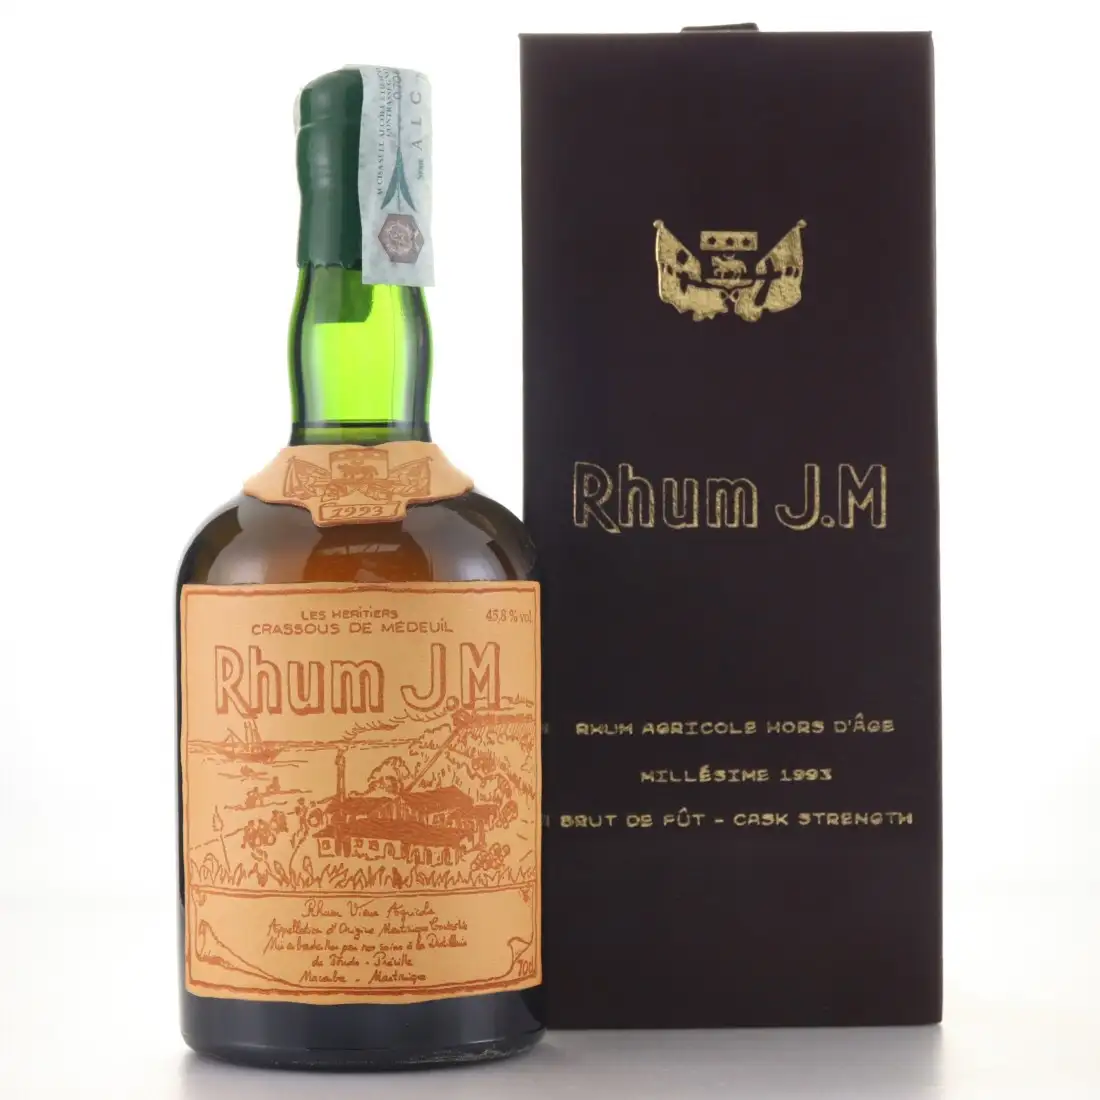 Image of the front of the bottle of the rum 1993